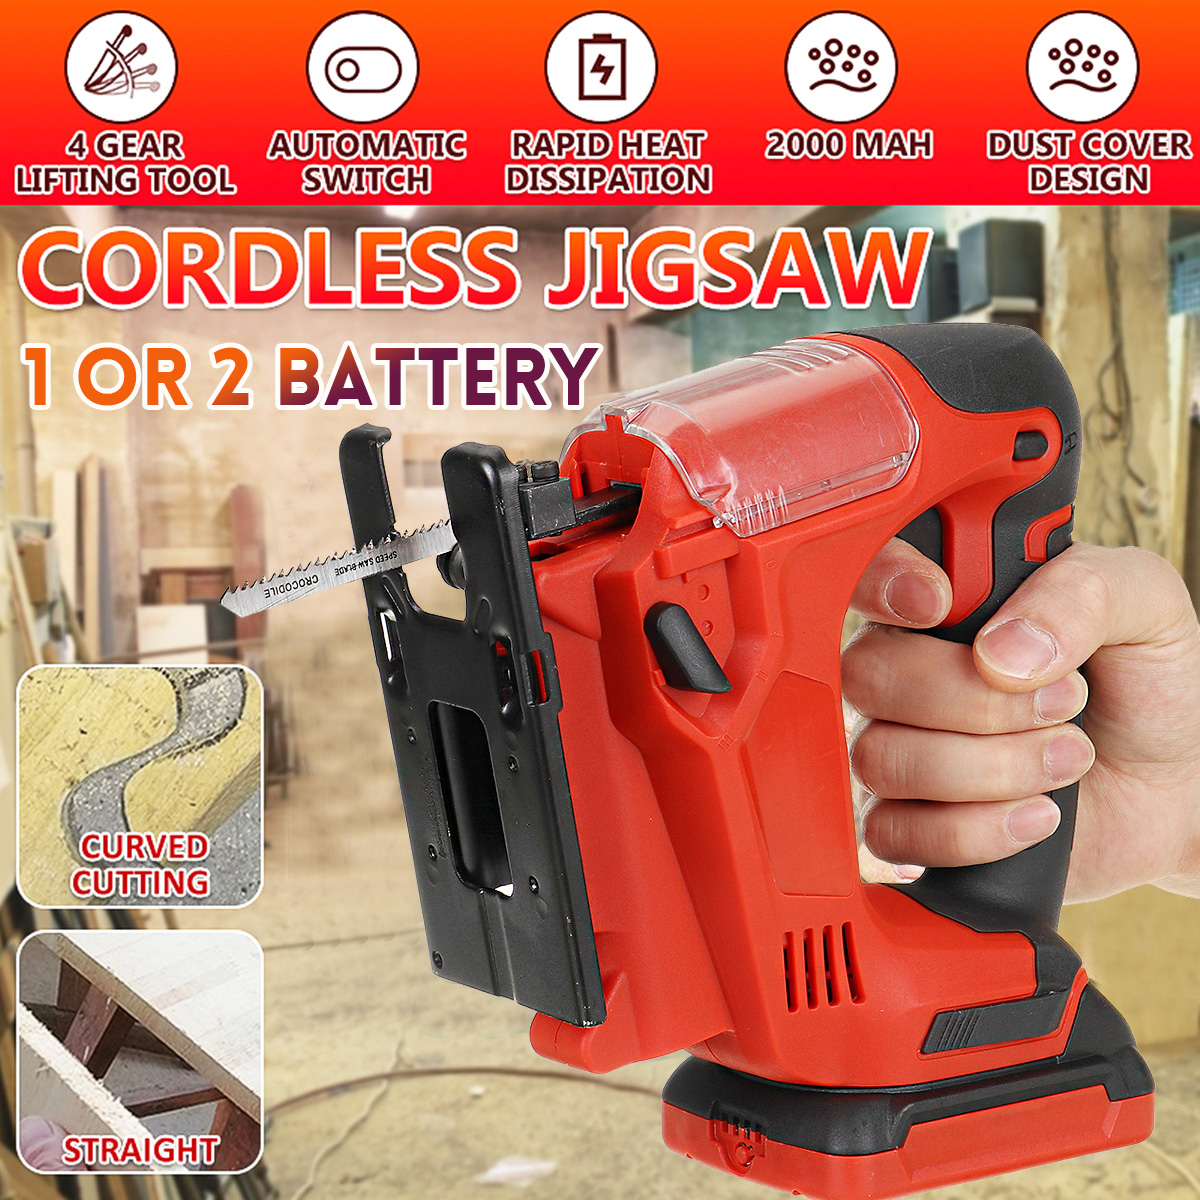 Drillpro-2000mAh-Electric-Saws-Cordless-Jig-Saw-Angle-Adjustble-65mm-Cutting-Depth-With-1-Or-2-Batte-1840189-2